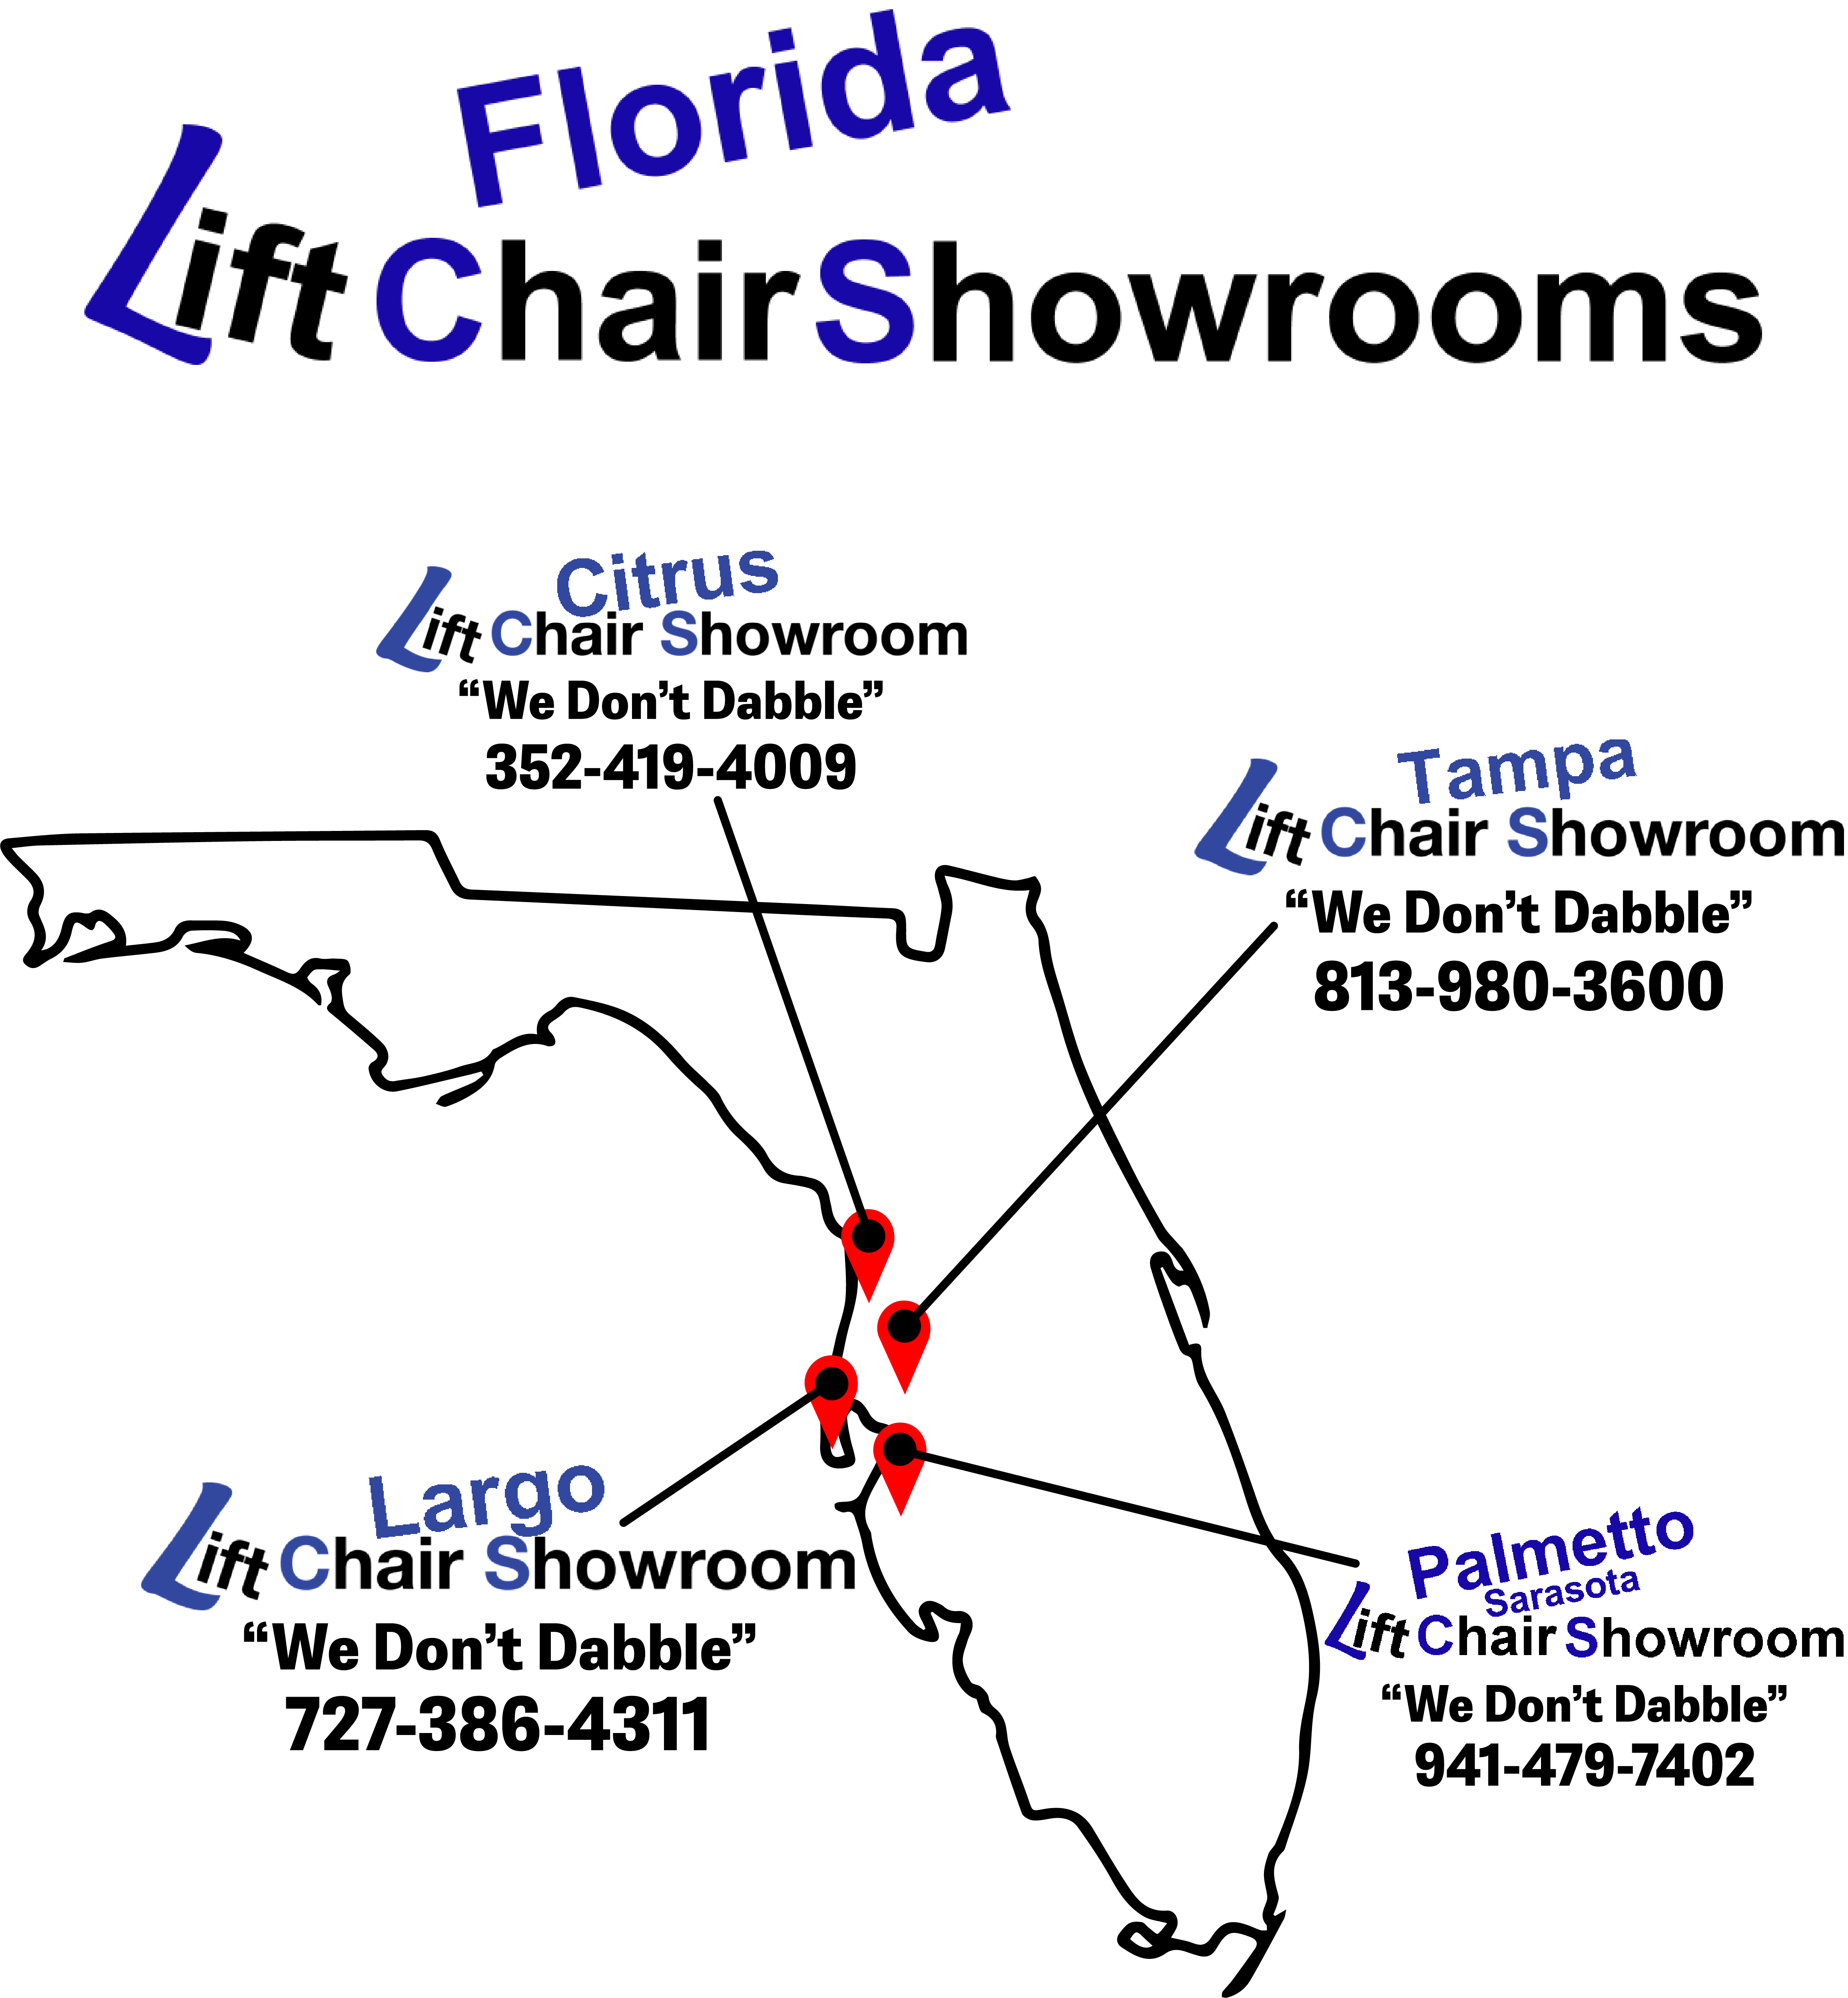 Graphic of the four showroom locations on an outline of Florida.